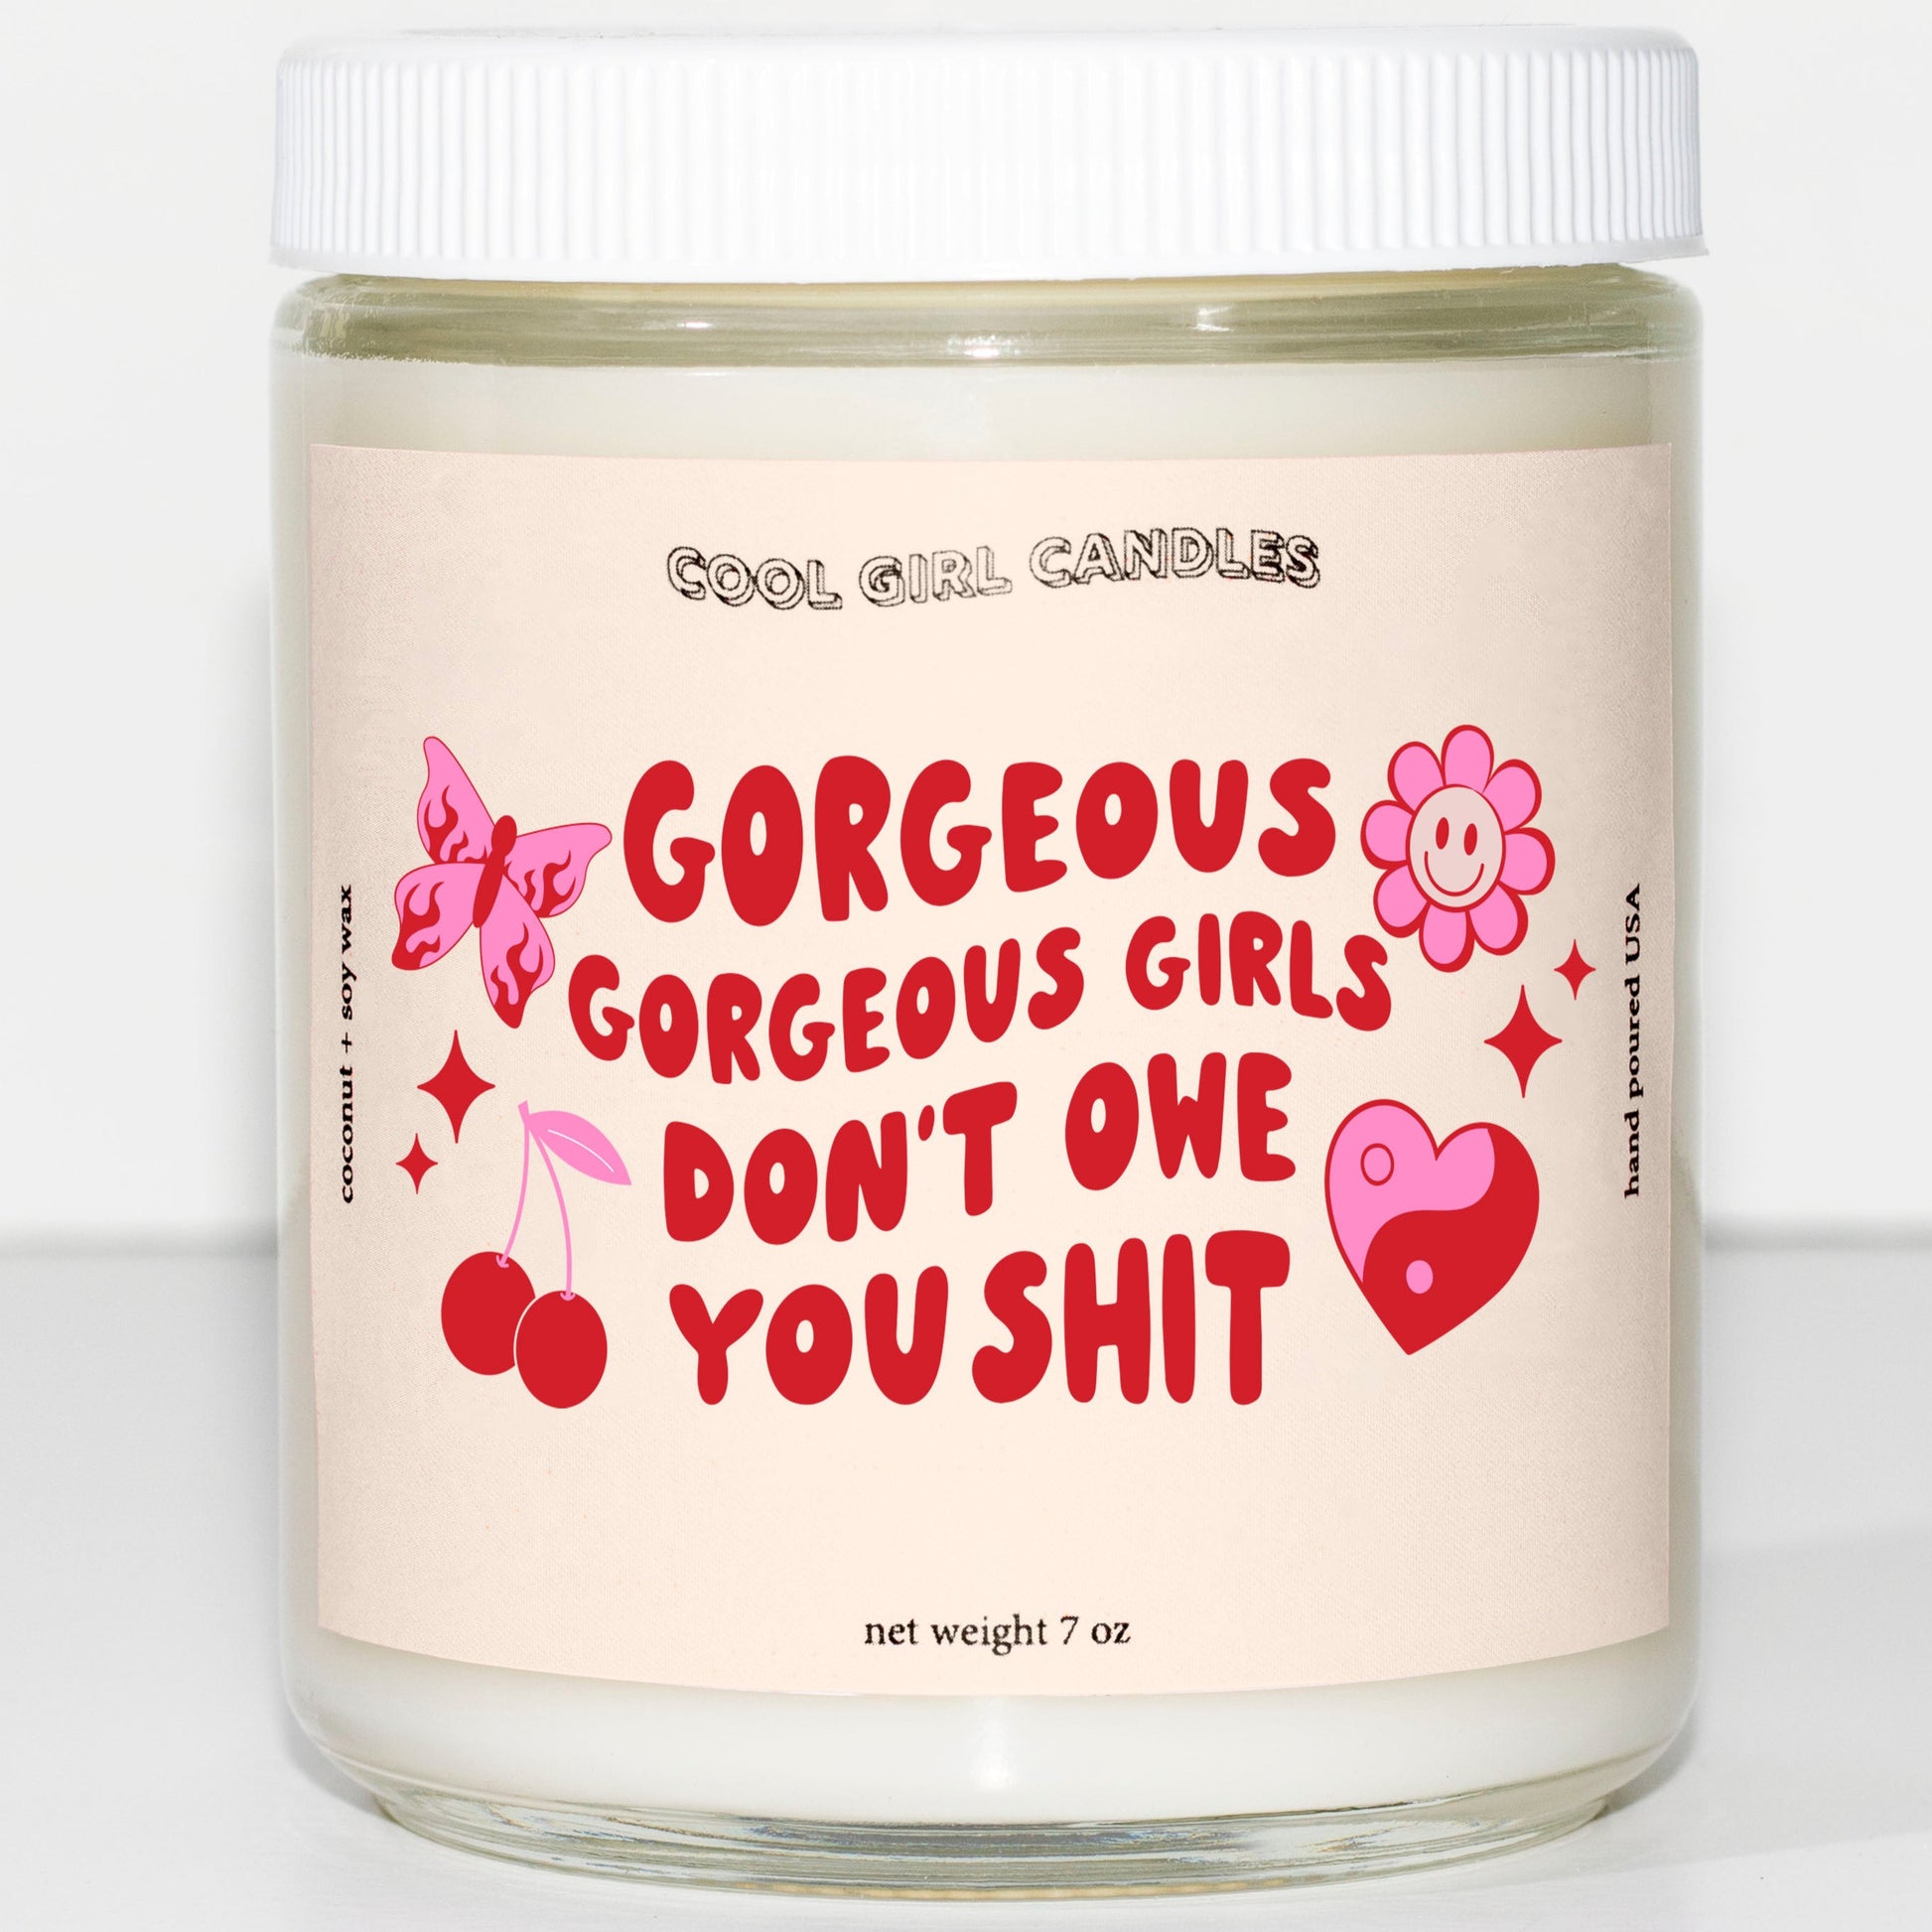 Gorgeous gorgeous girls don't owe you shit candle. A cheeky and funny candle that makes for the perfect gift for your best friend by cool girl candles 